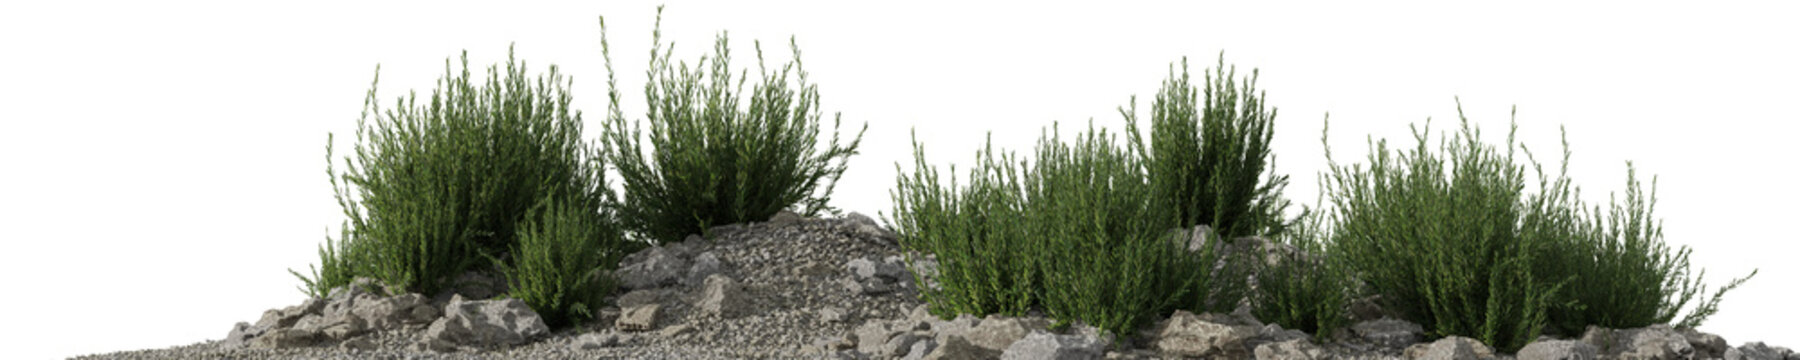 Evergreen rosemary plant growing on the rocks with isolated on transparent background - PNG file, 3D rendering illustration